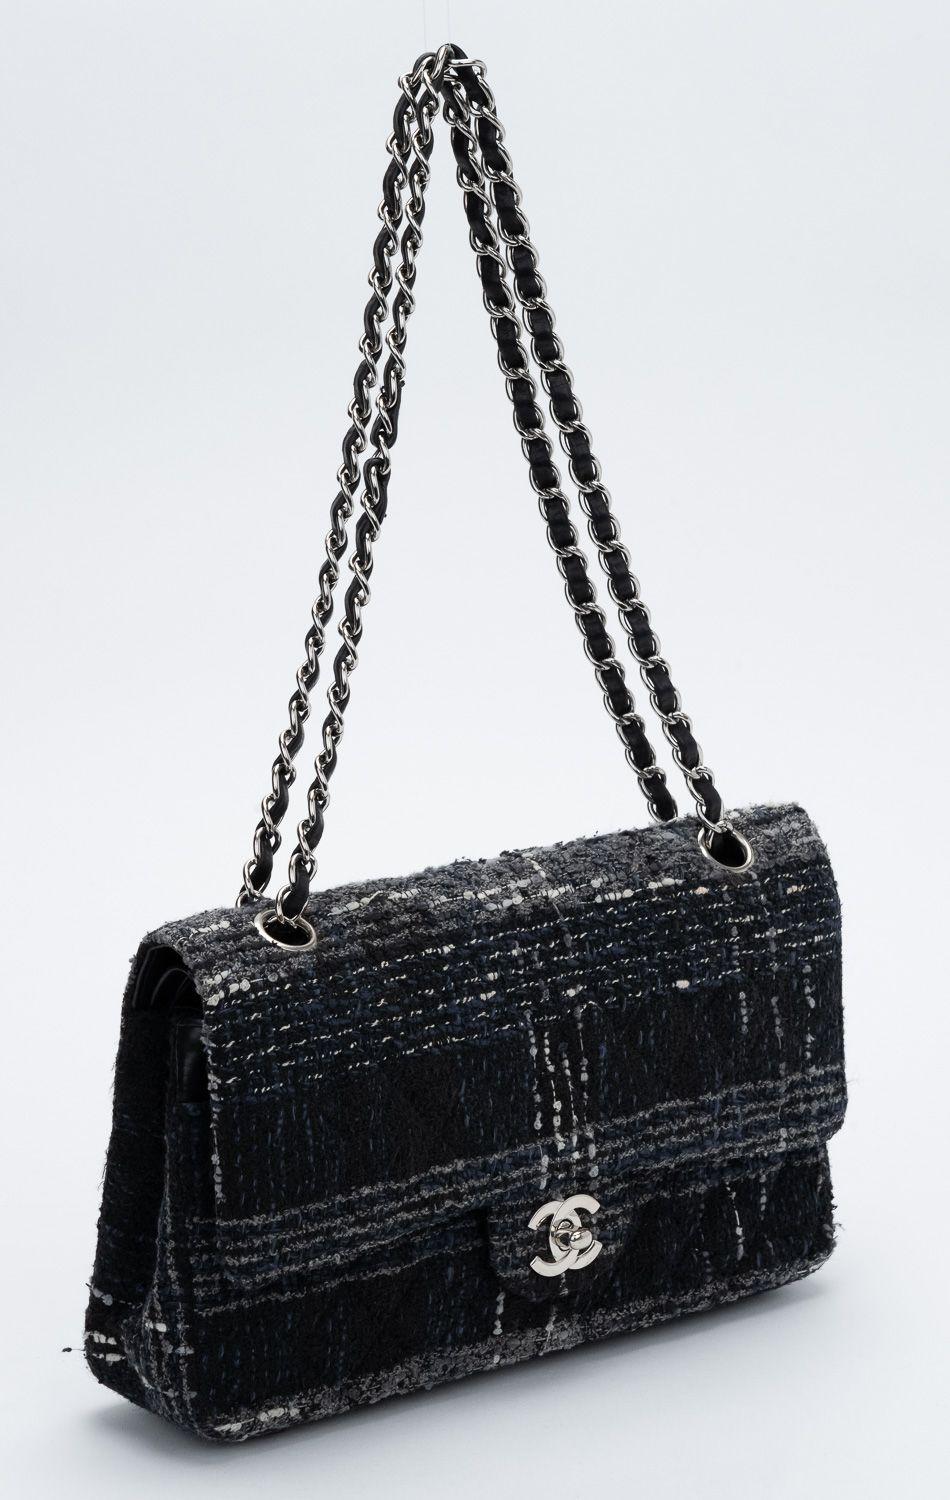 Chanel black and blue tweed classic double flap with lambskin interior. Can be worn two ways: shoulder drop, 17.5